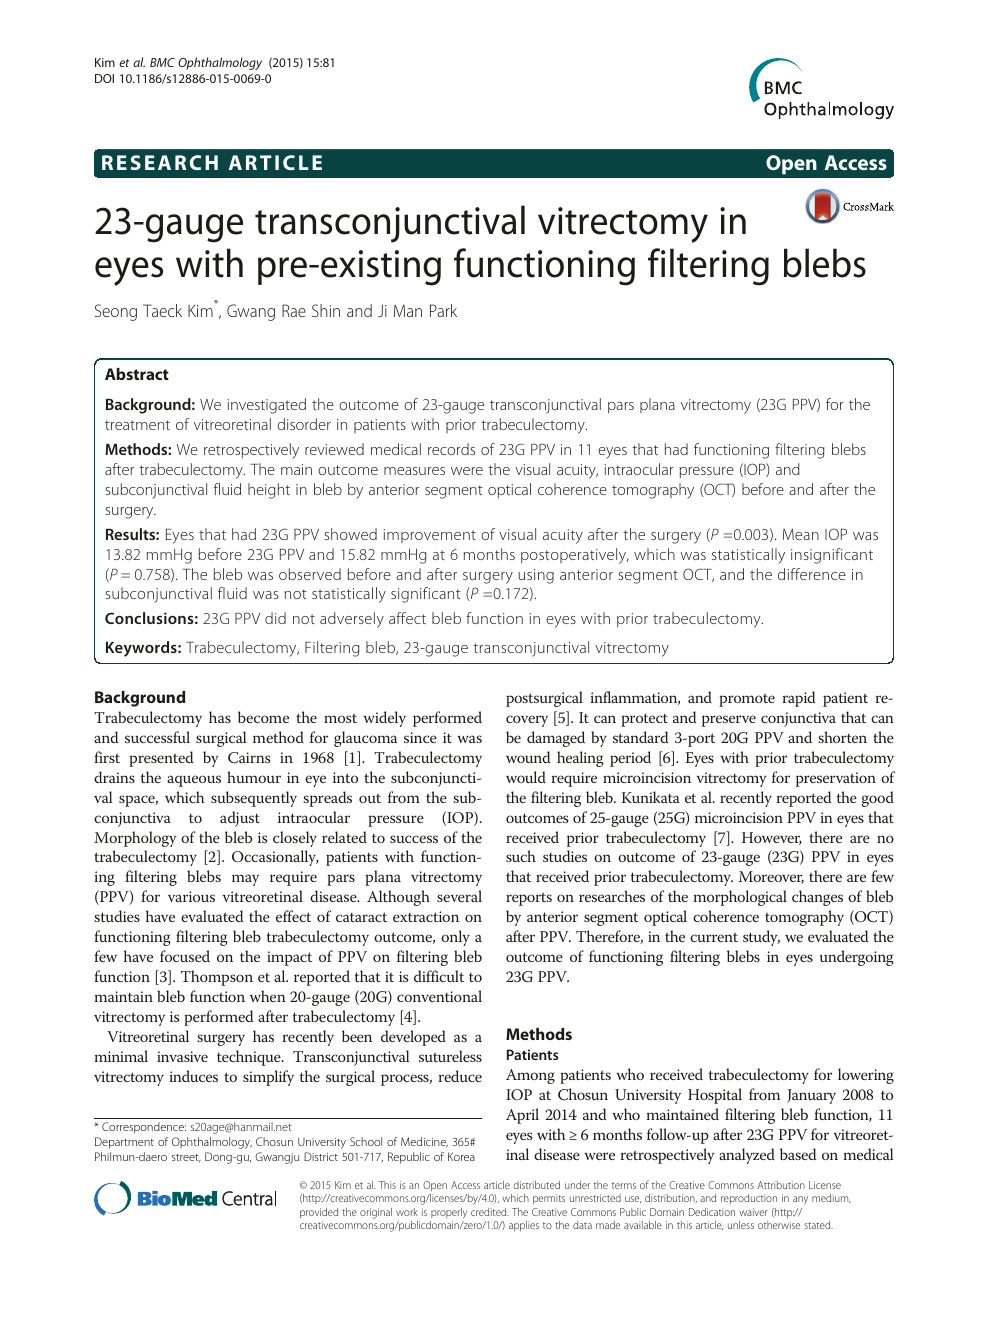 23-gauge transconjunctival vitrectomy in eyes with pre-existing